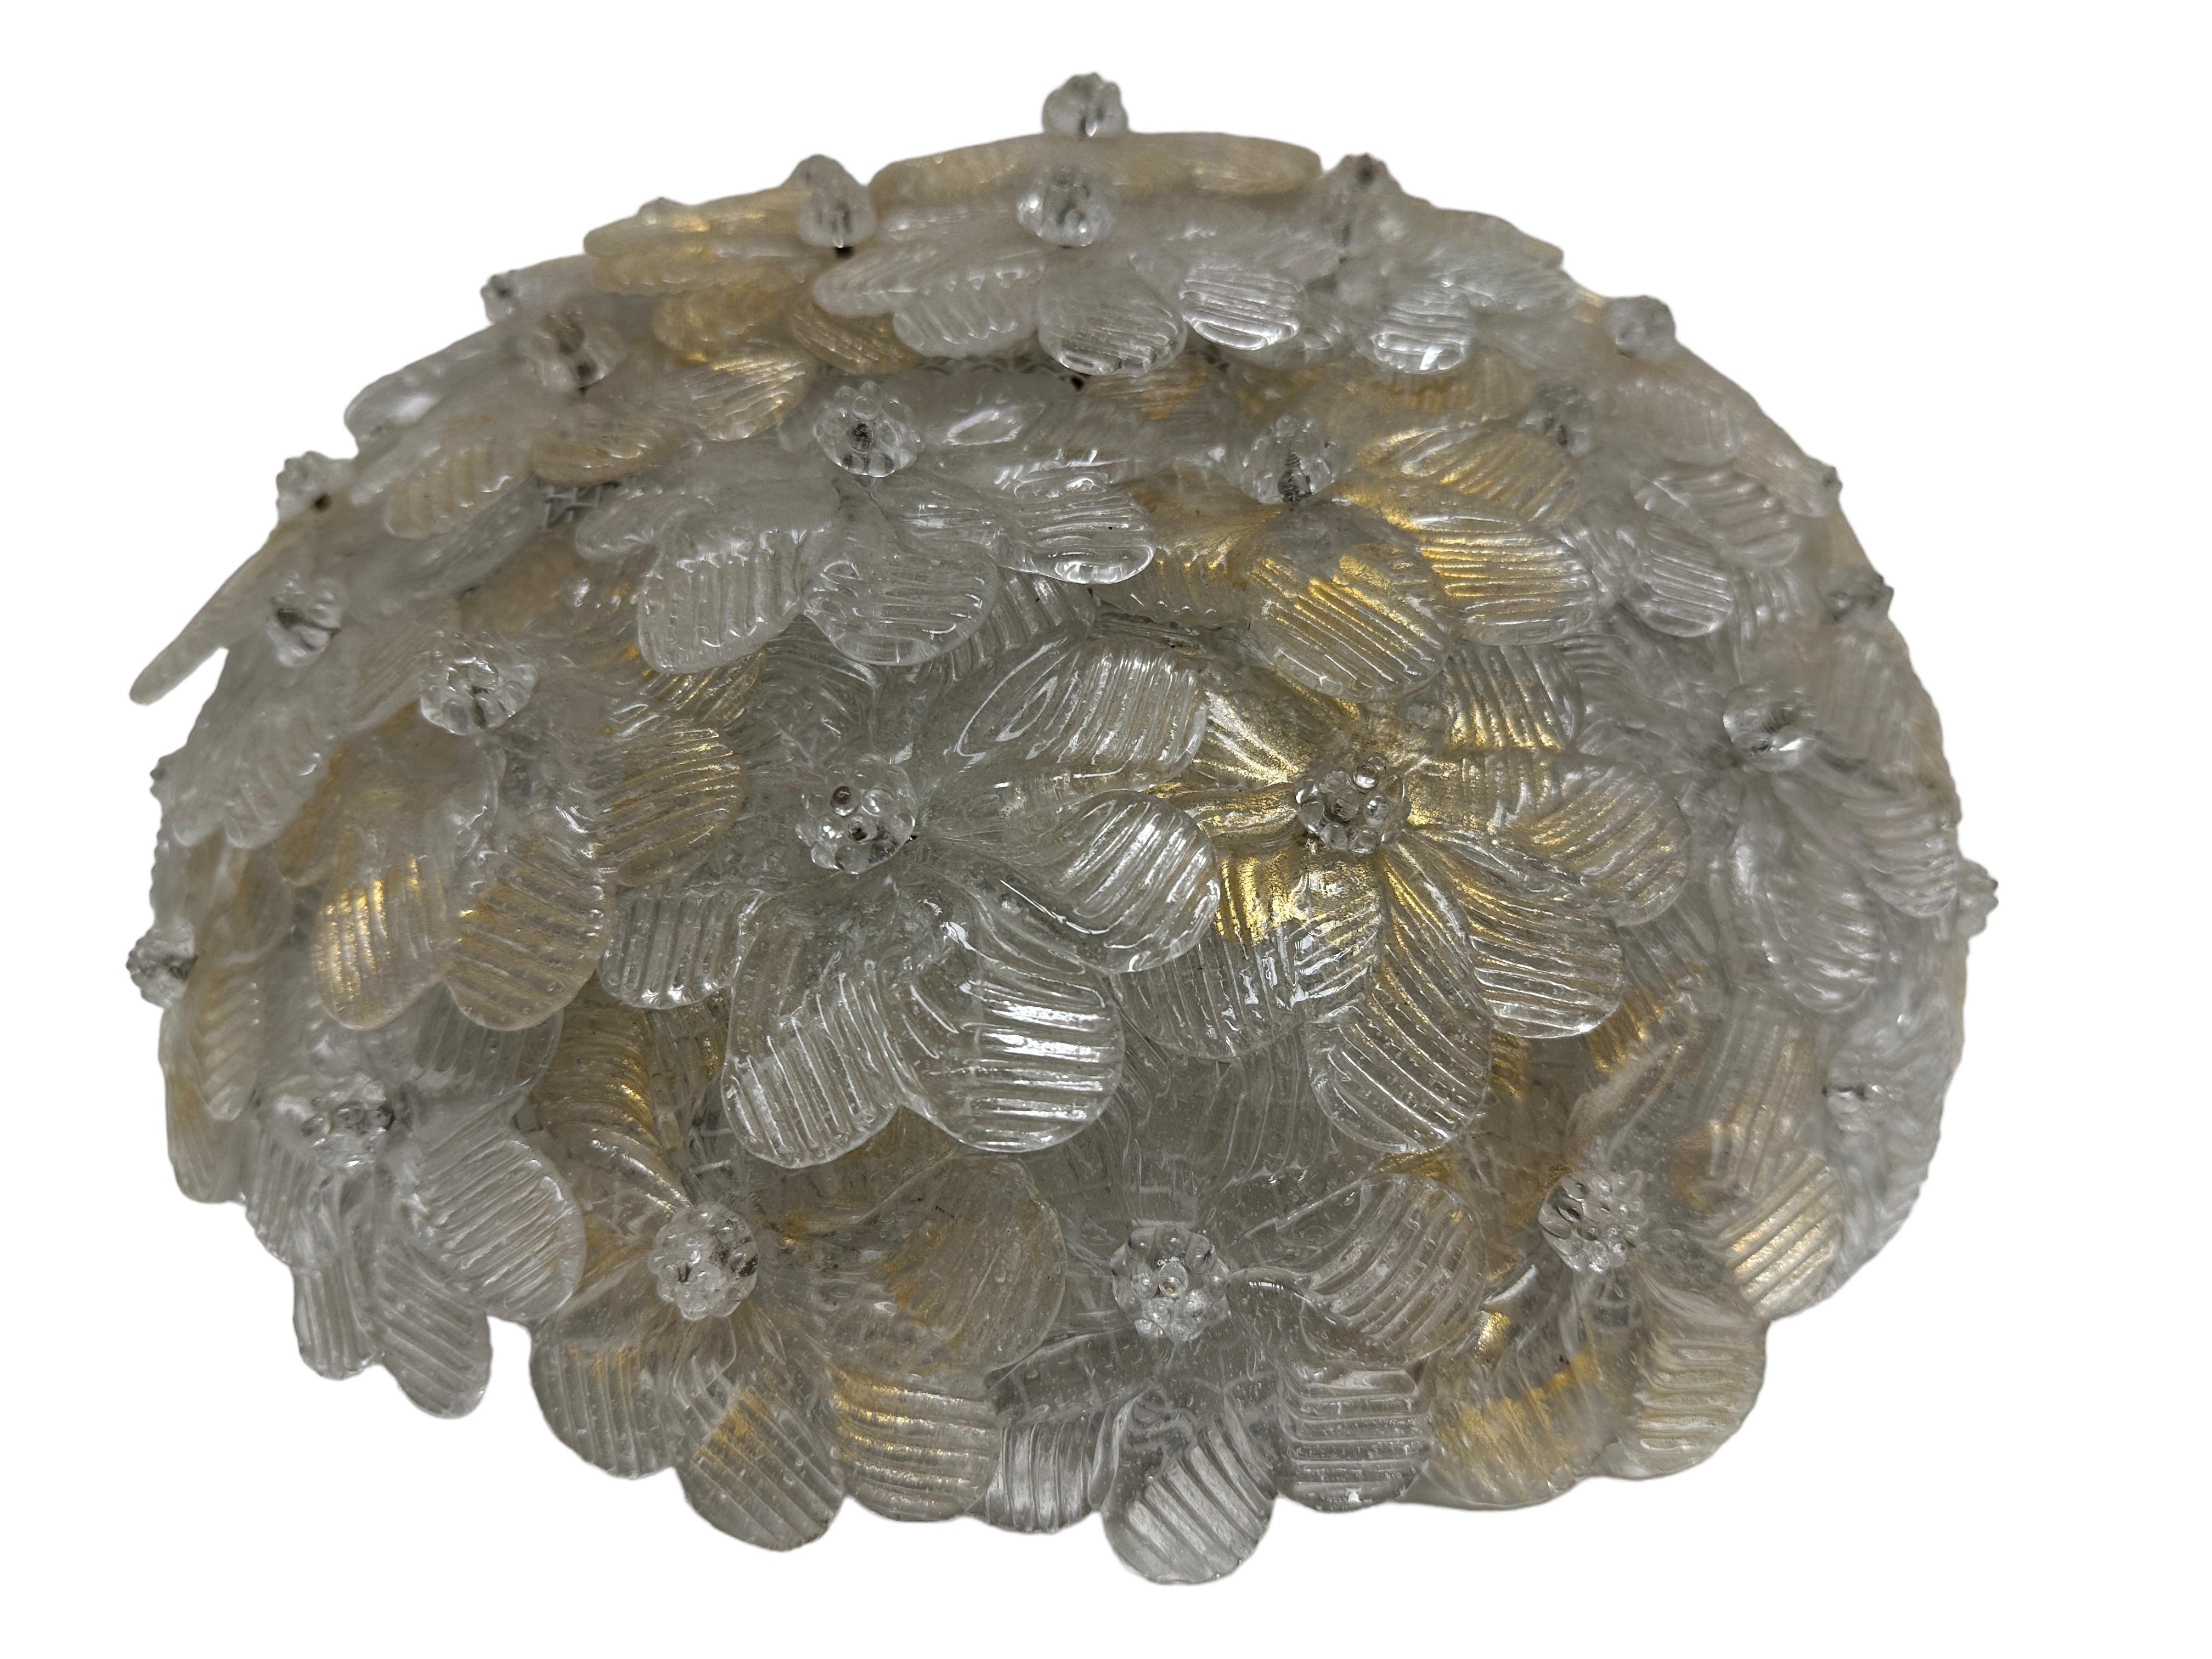 A hand blown Italian flush mount chandelier featuring overlapping crystal flowers, gold with 23-carat gold leaf fleck inclusions, mounted on a basket frame. The fixture requires two European E14 / 110 volt candelabra bulbs, each bulb up to 60 watts.